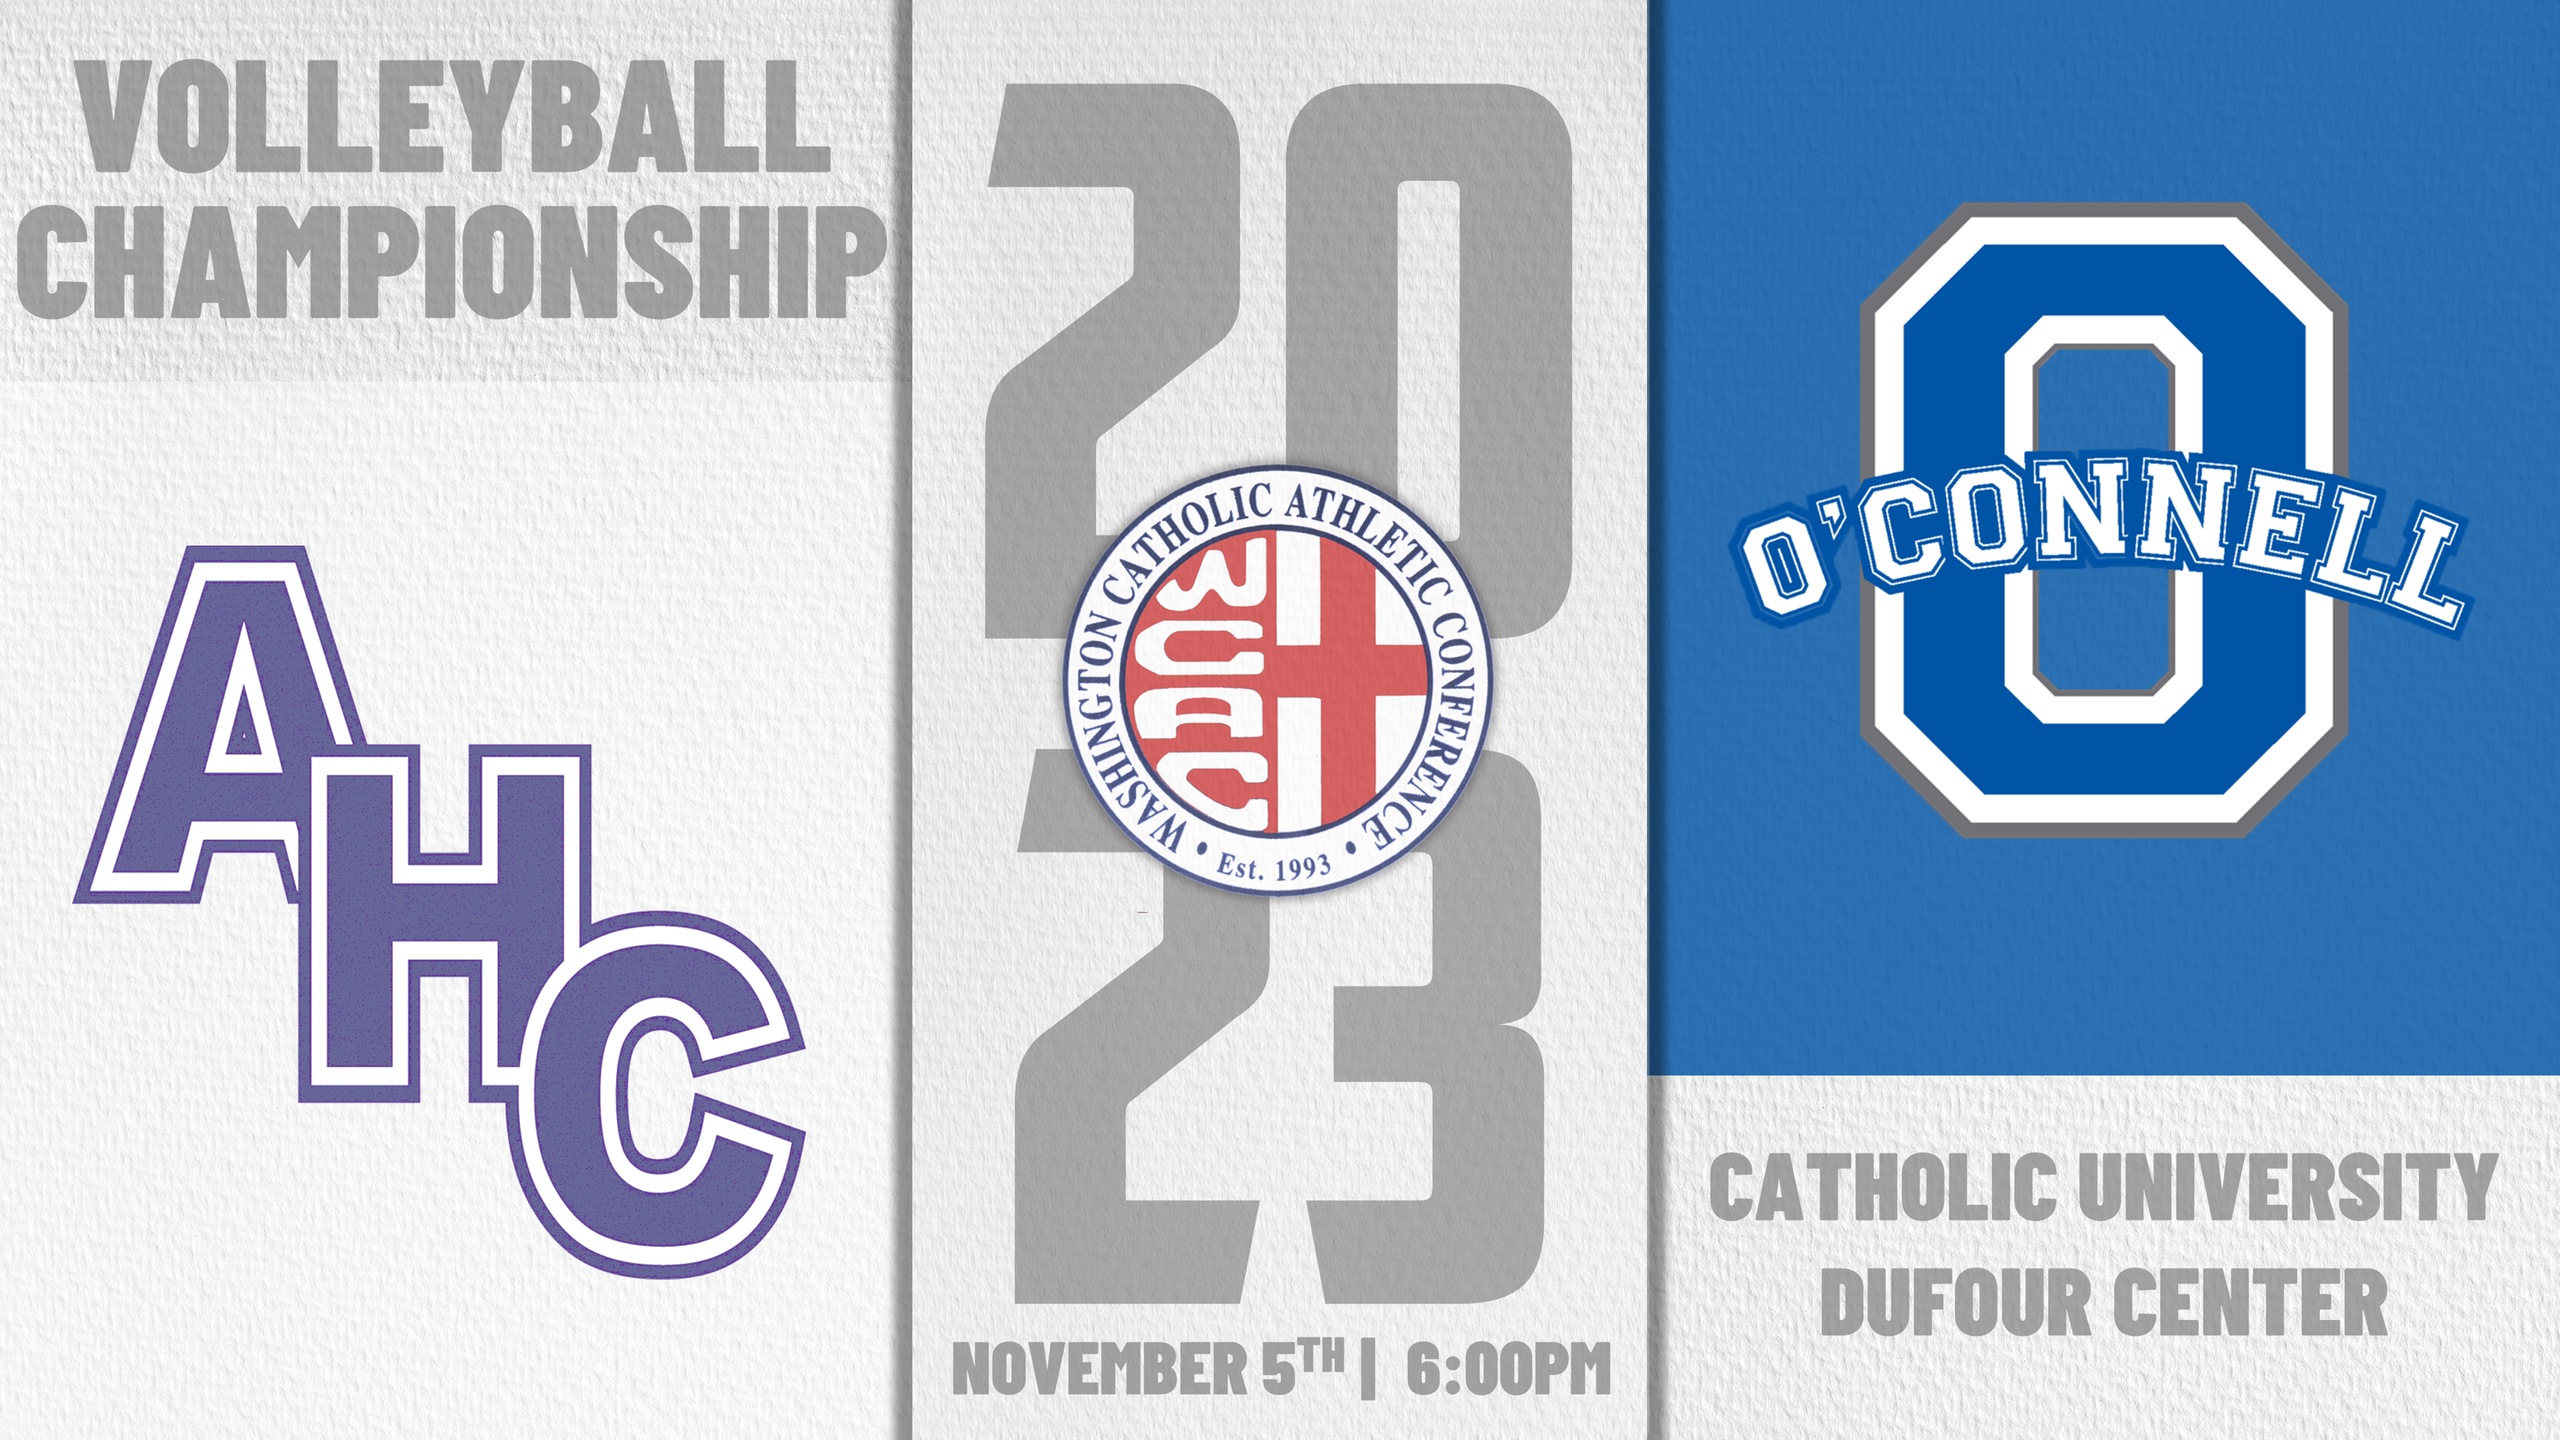 Volleyball Championship Will be on Nov 5th - Click Here for Tickets